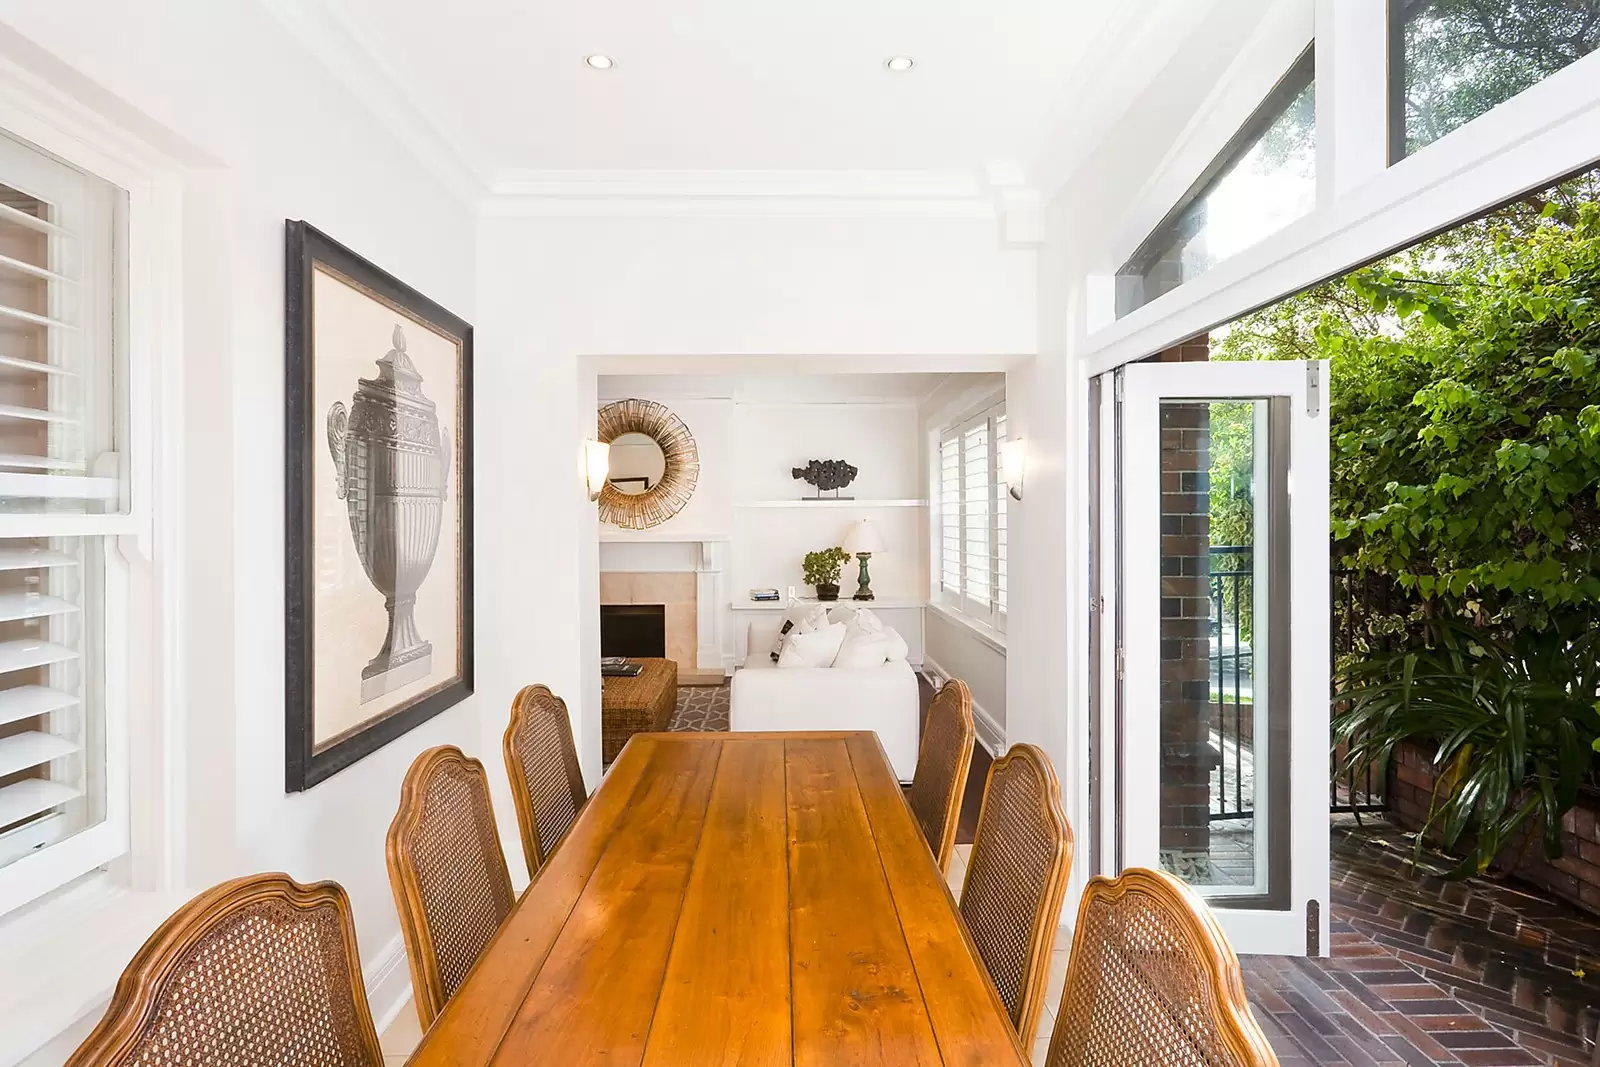 Photo #12: 'Chatsworth/59 Wolseley Road, Point Piper - Sold by Sydney Sotheby's International Realty